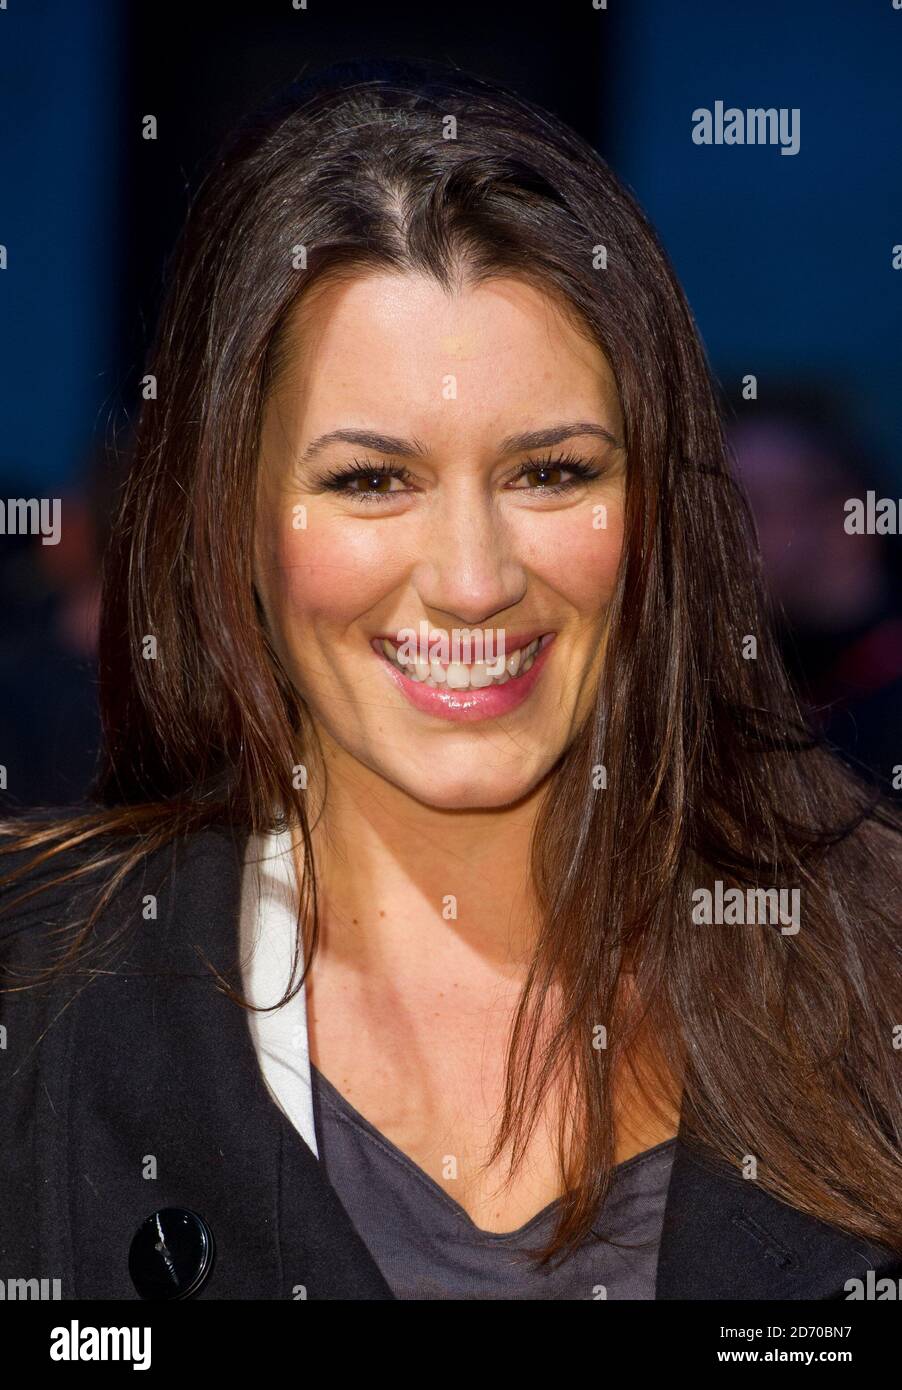 Kate Magowan attending the BFI London Film Festival screening of Everyday, at the Odeon West End in central London. Stock Photo